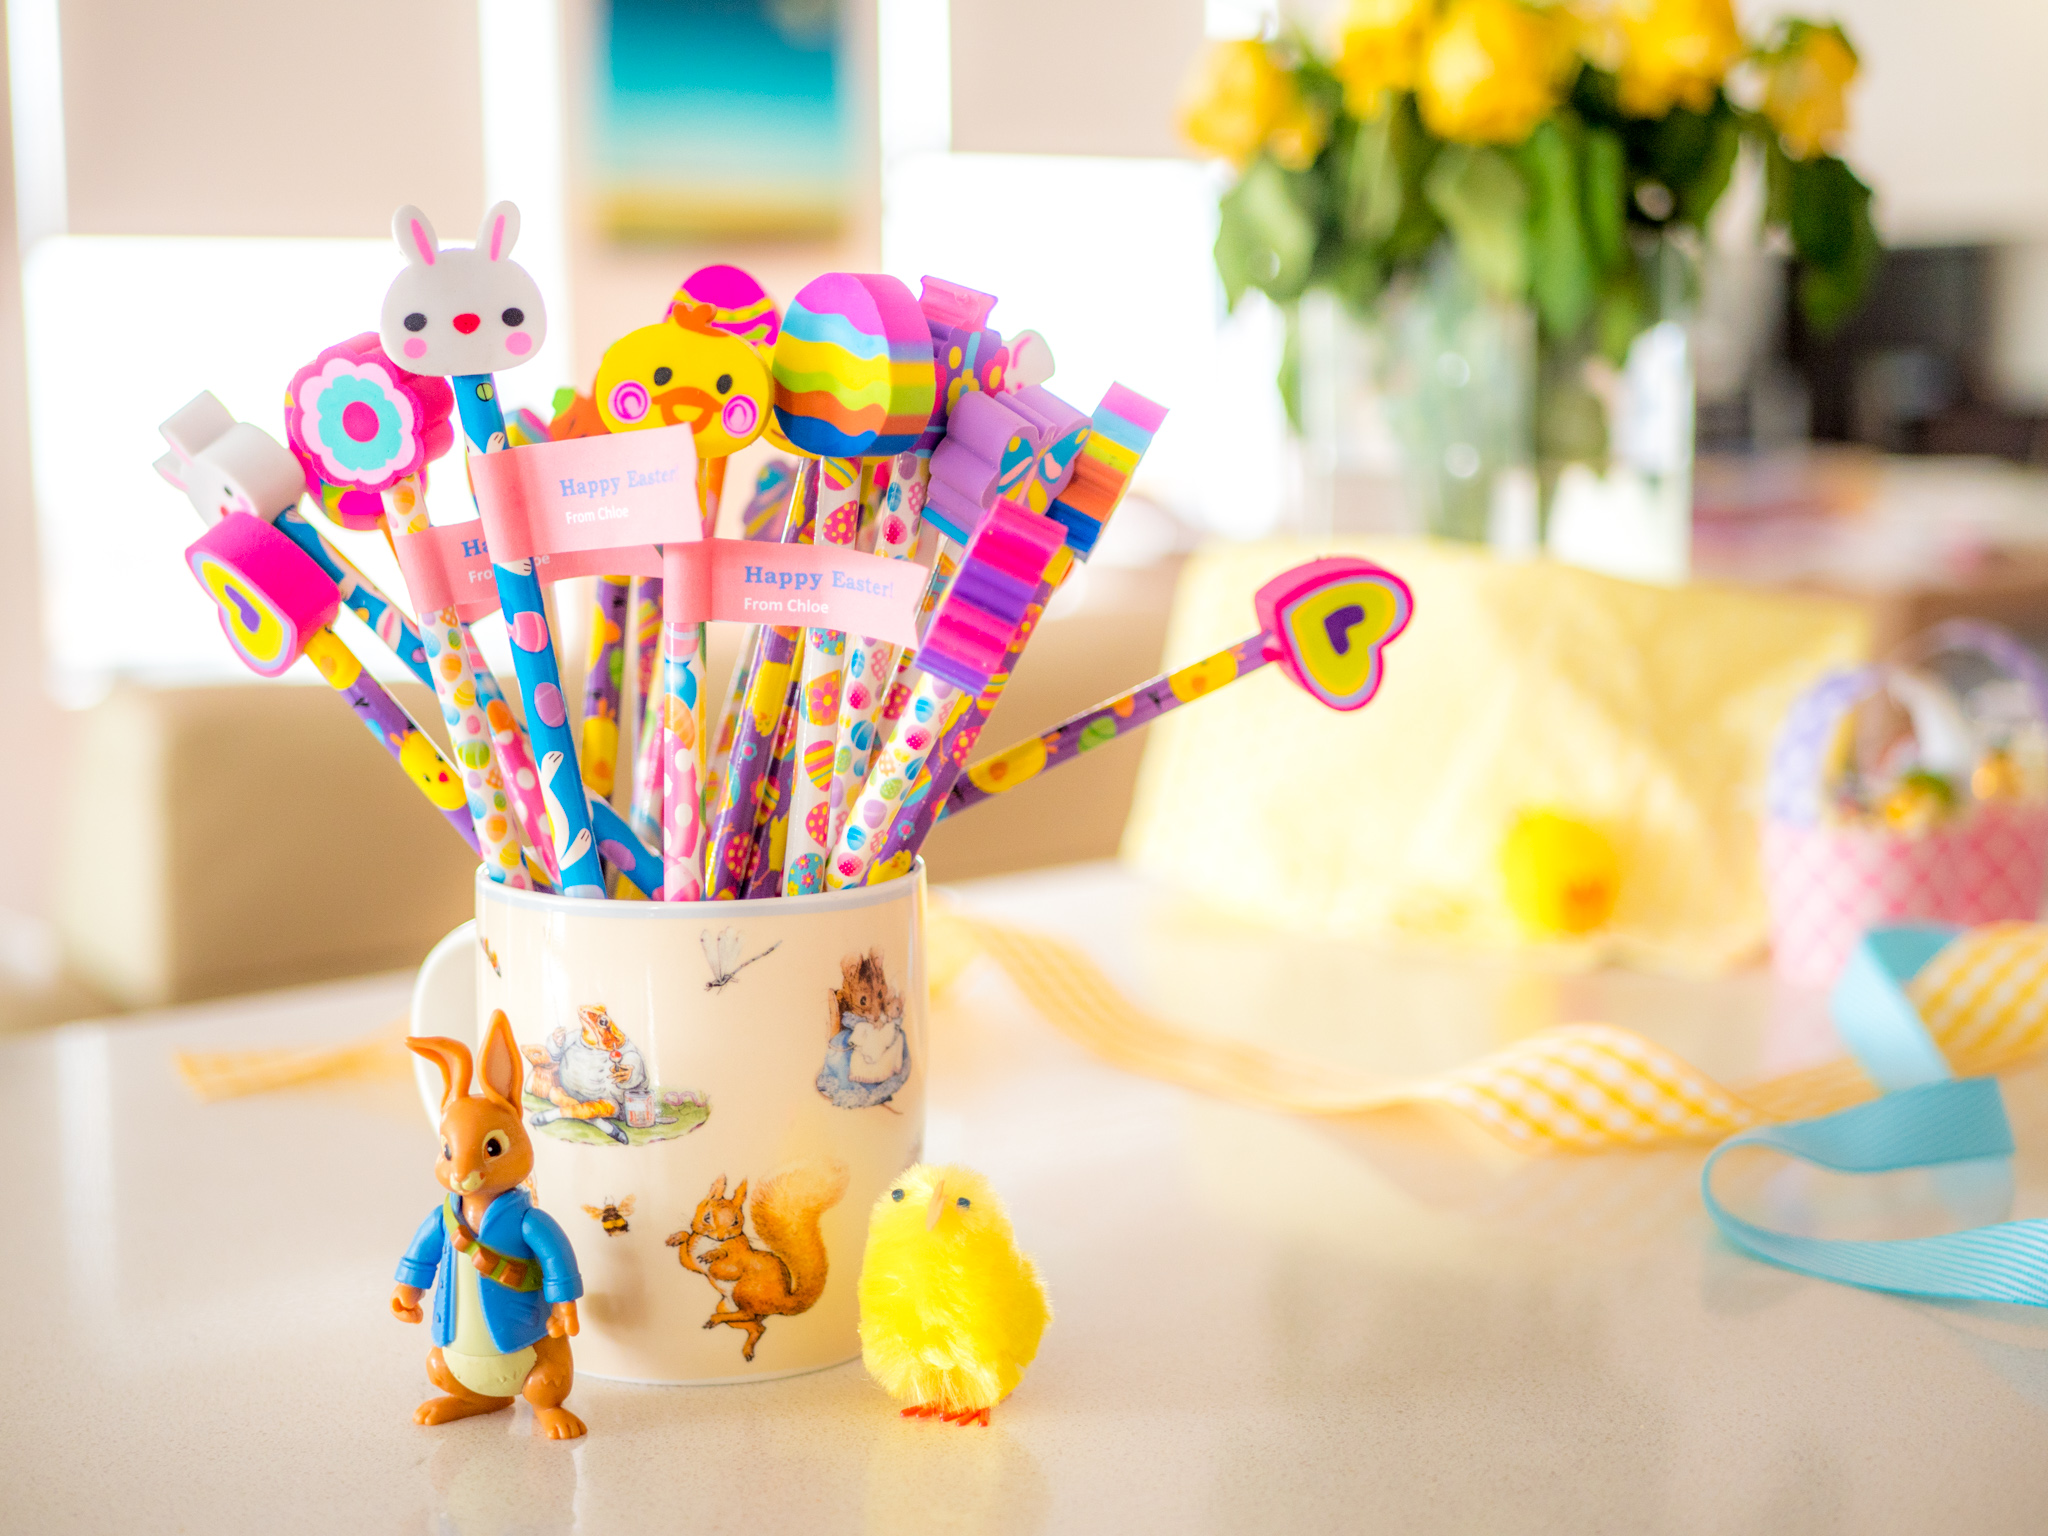 Check out a Fundamental Gift Ideas on Easter Celebration